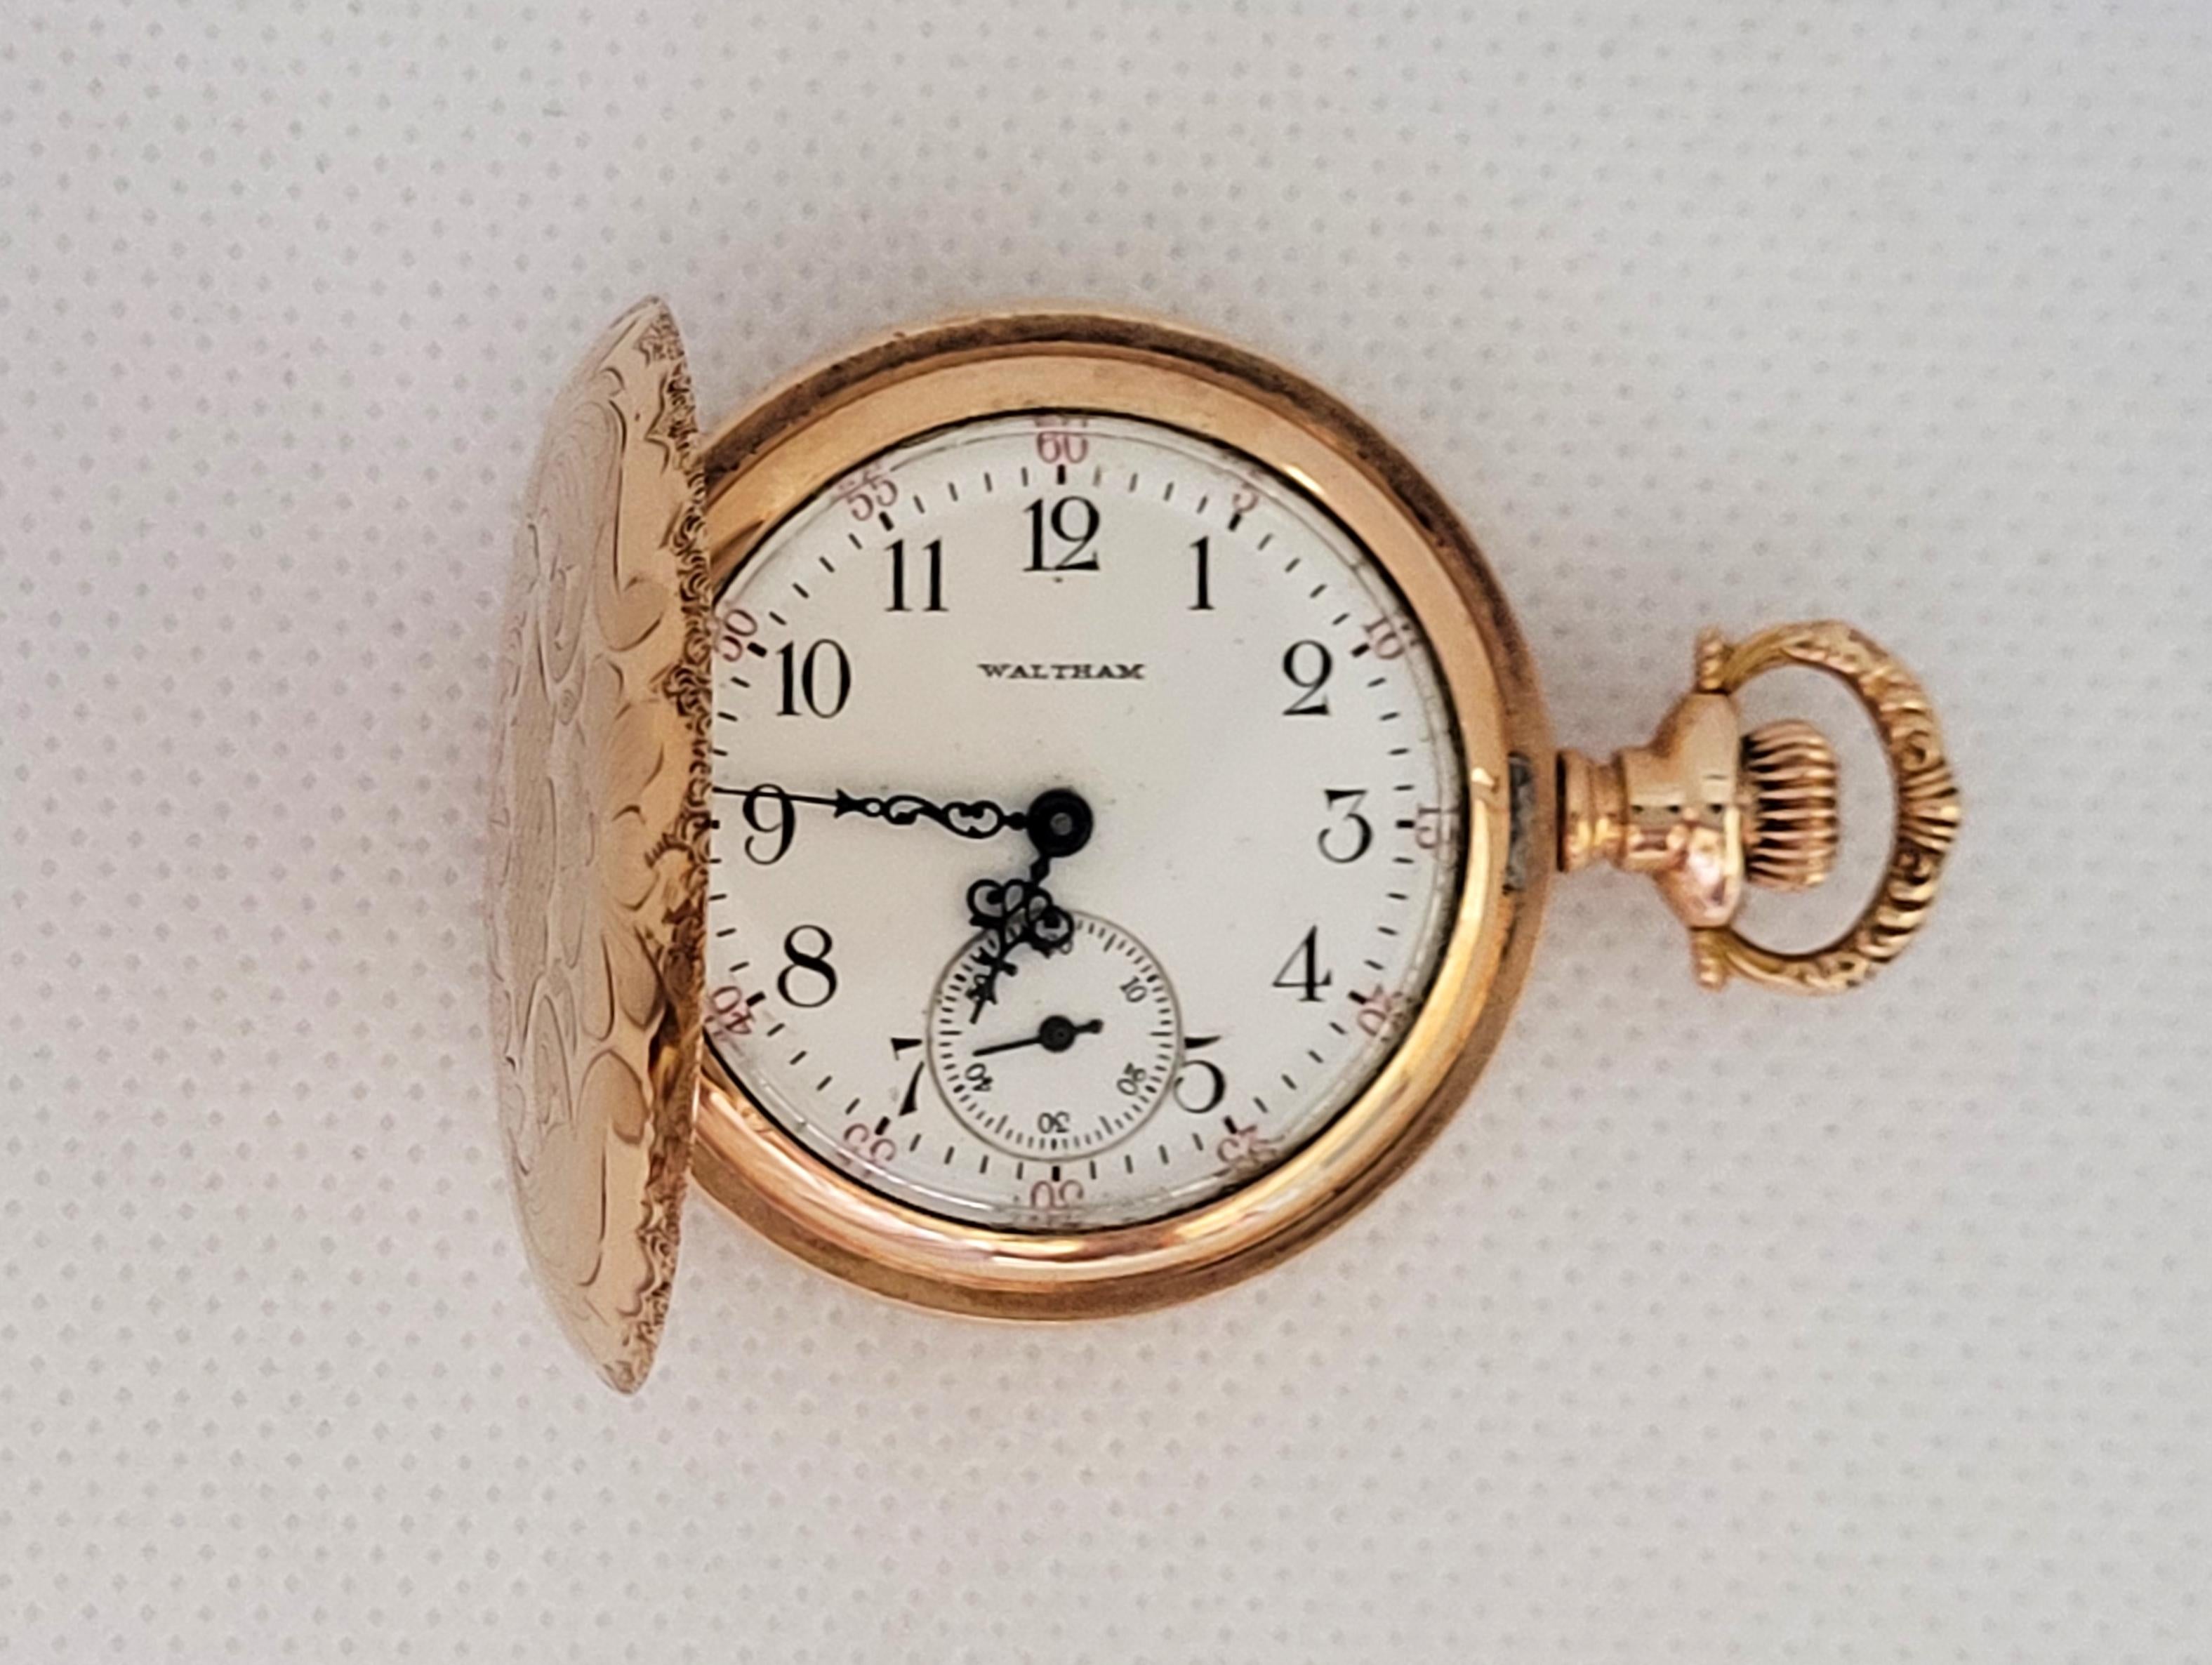 Waltham Pocket Watch Gold Plated Working #16360616 15 Jewels Os Size In Good Condition For Sale In Rancho Santa Fe, CA